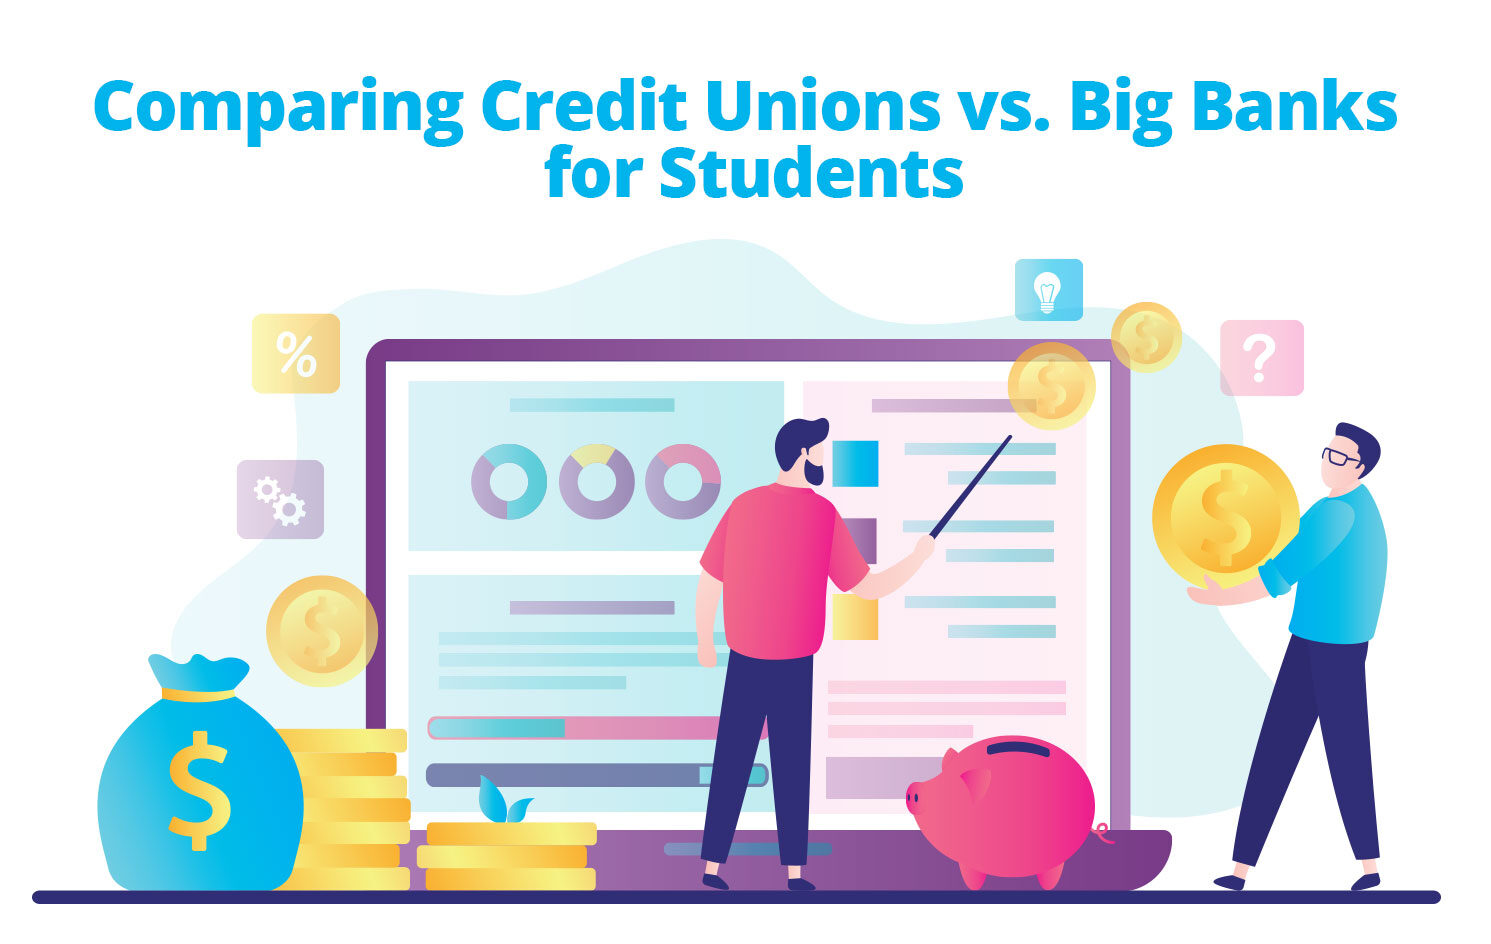 Comparing Credit Unions vs. Big Banks for Students